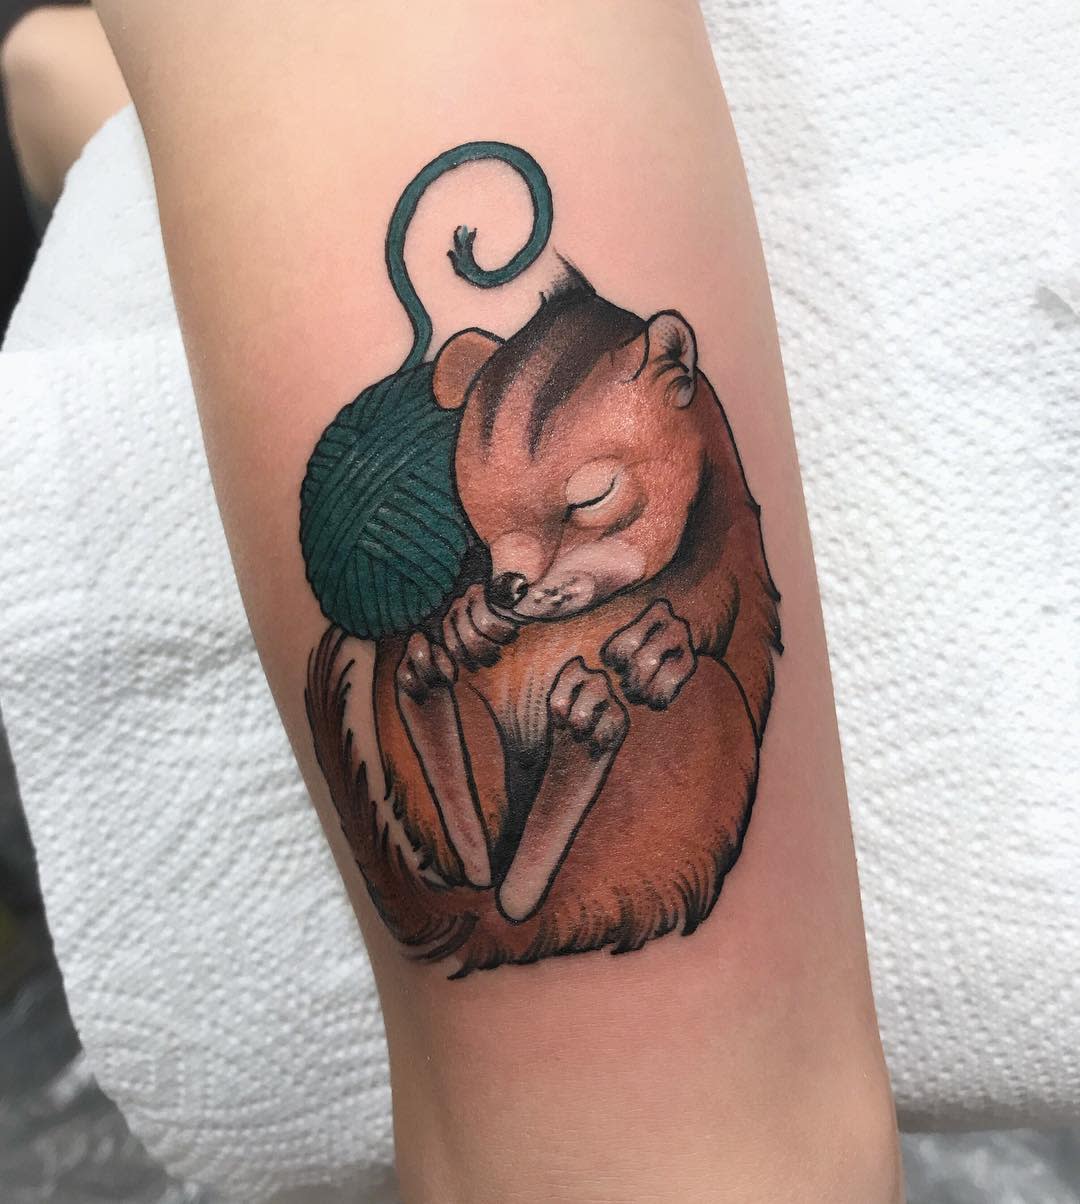 Little squirrel from tattoos Cute as a button  Studio XIII Gallery